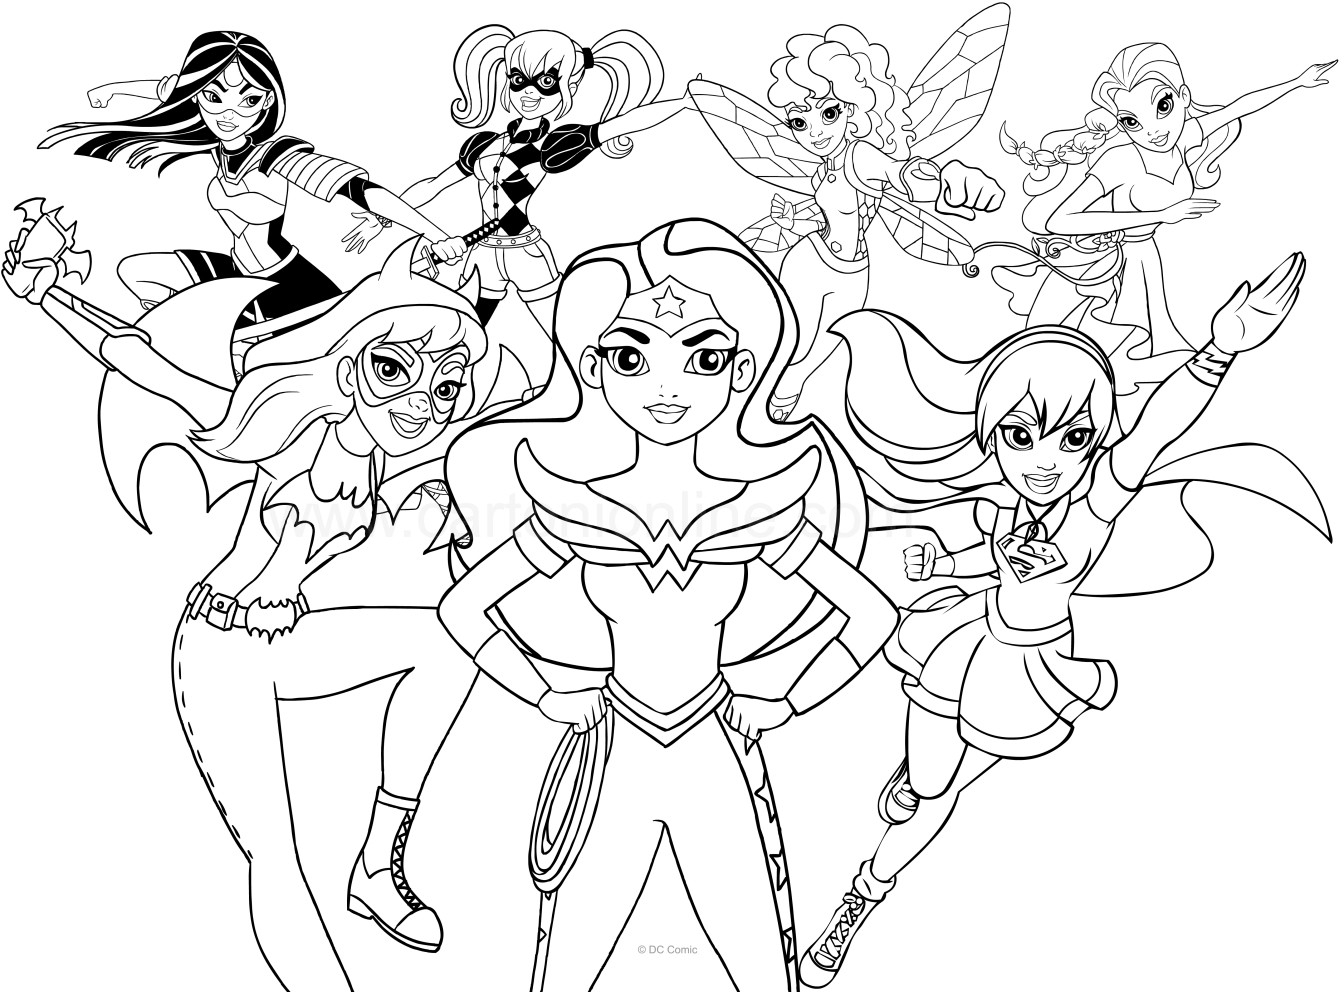 Super Hero Coloring Page Superhero Coloring Pages Printable Coloring Page For Kids